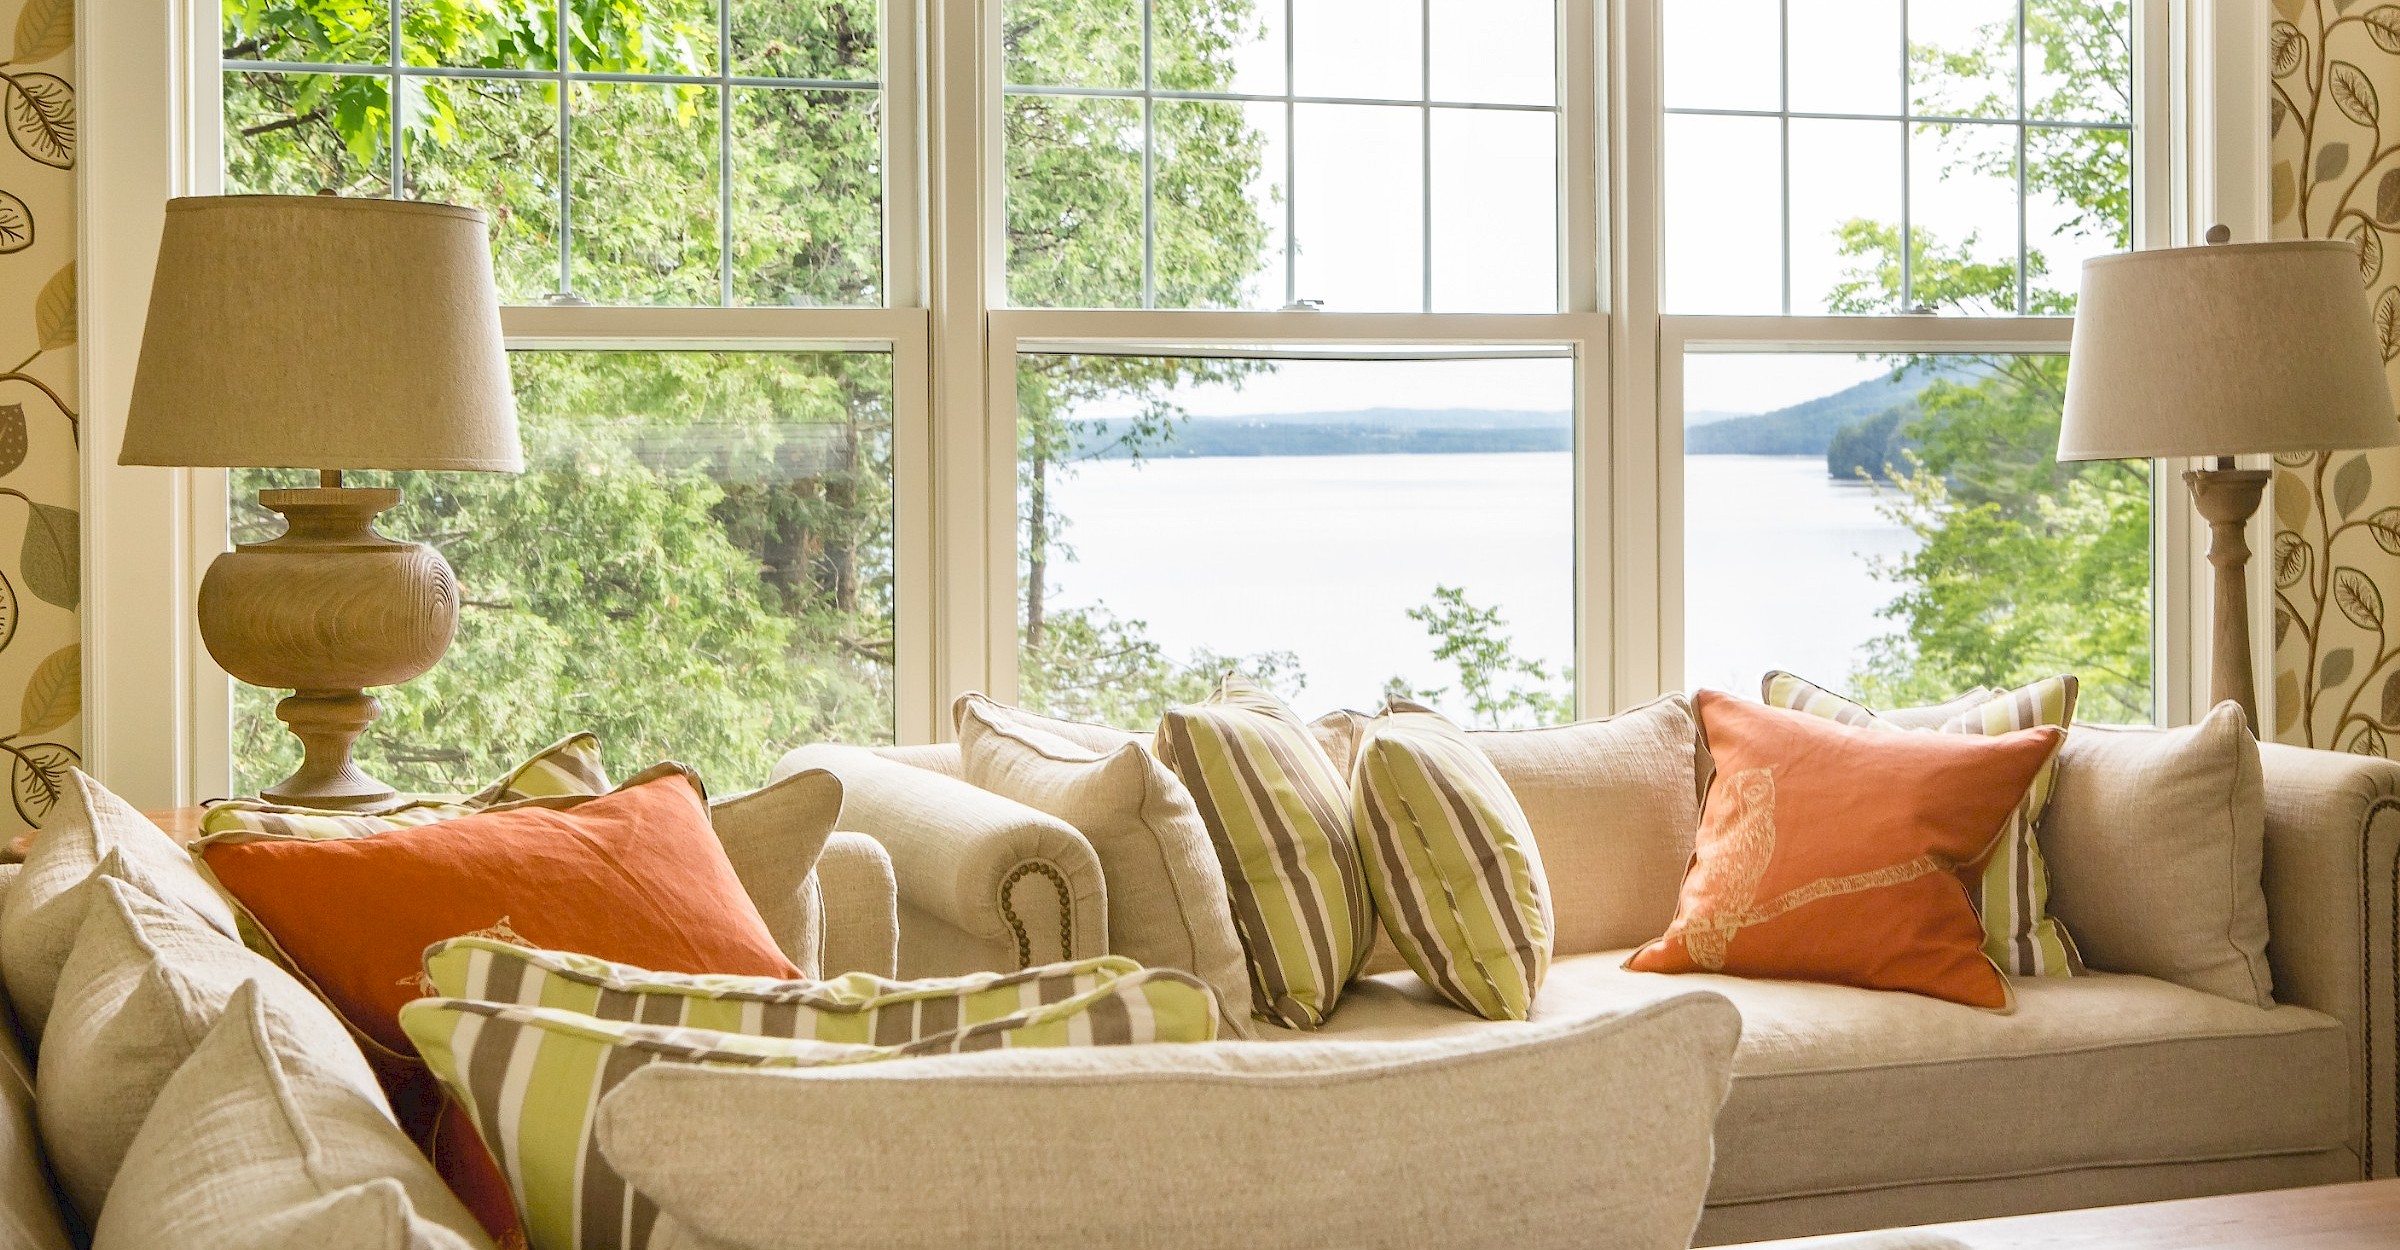 Living room with sofa and view of the lake through the windows